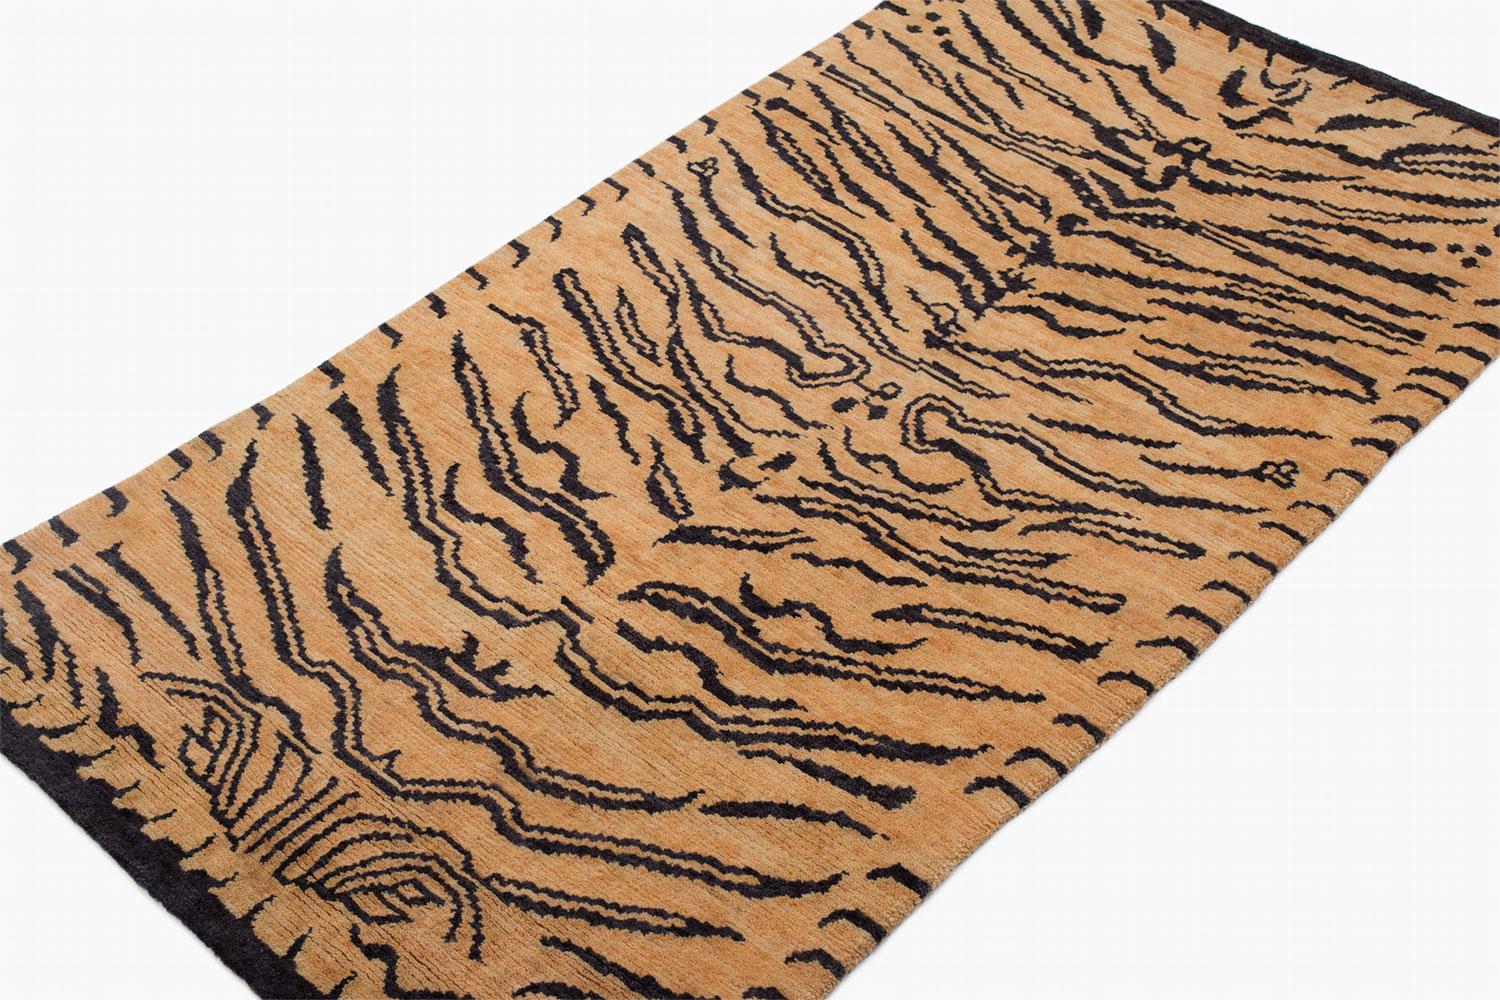 This tiger carpet is a fresh take on an original Joseph Carini design. It has a textured weave, a Devi weave, 60 knot. It is 100% wool, hand-spun, and handwoven in Nepal. The abstract animal print is bold but not overwhelmingly so. Measures: 3' x